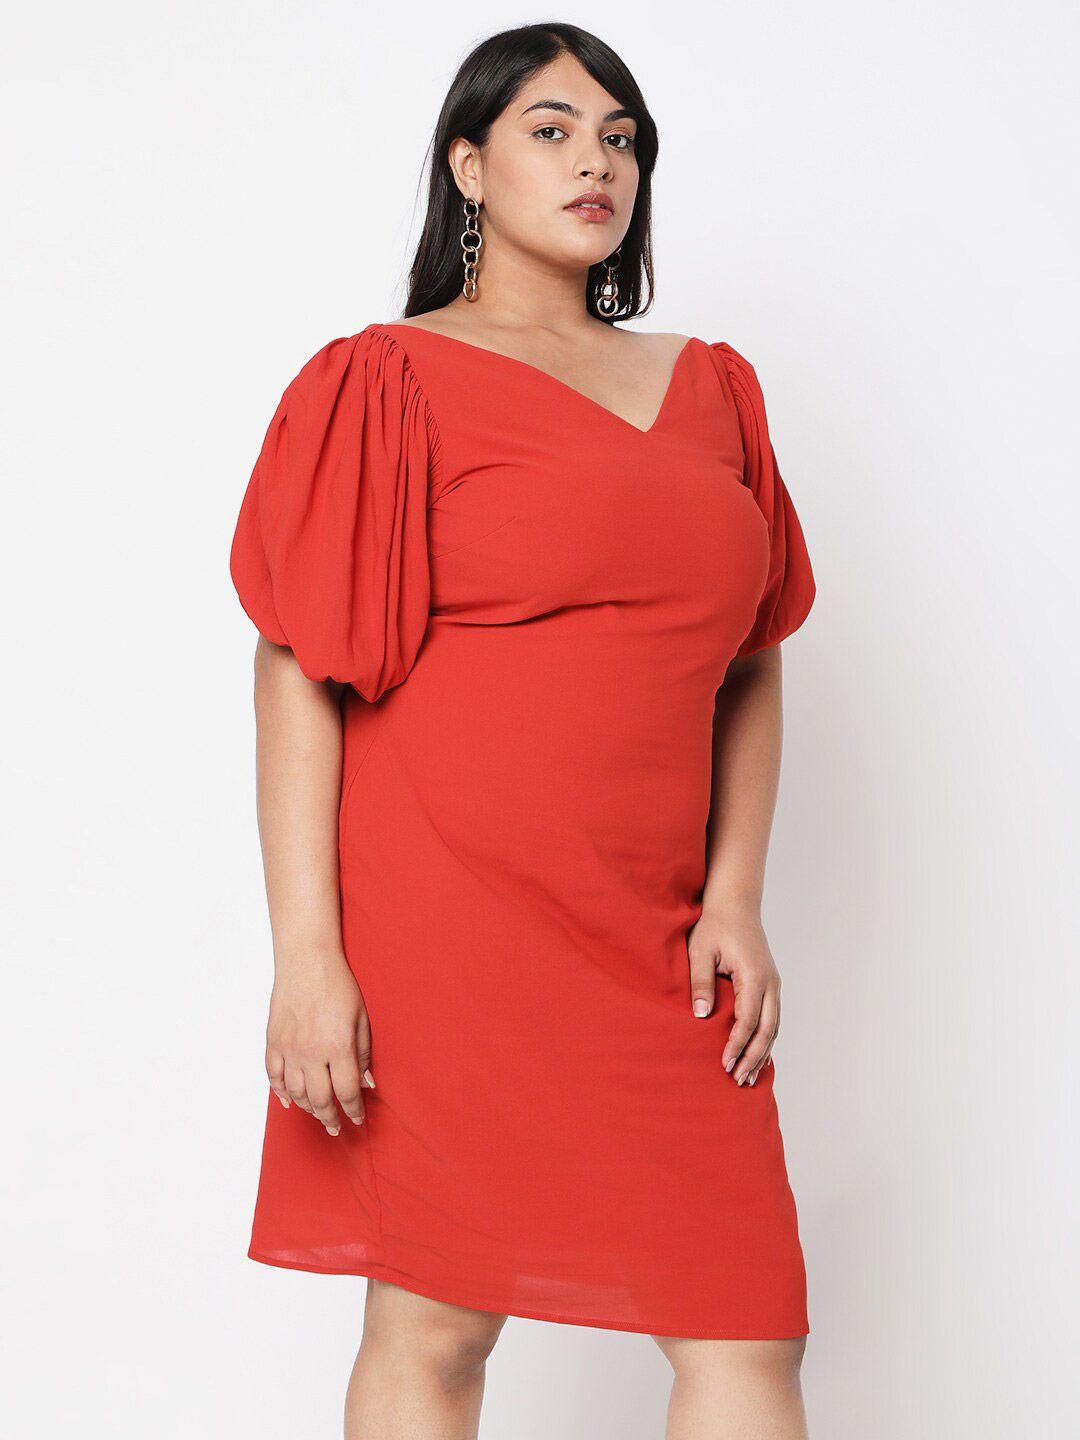 curves by mish plus size red sheath dress